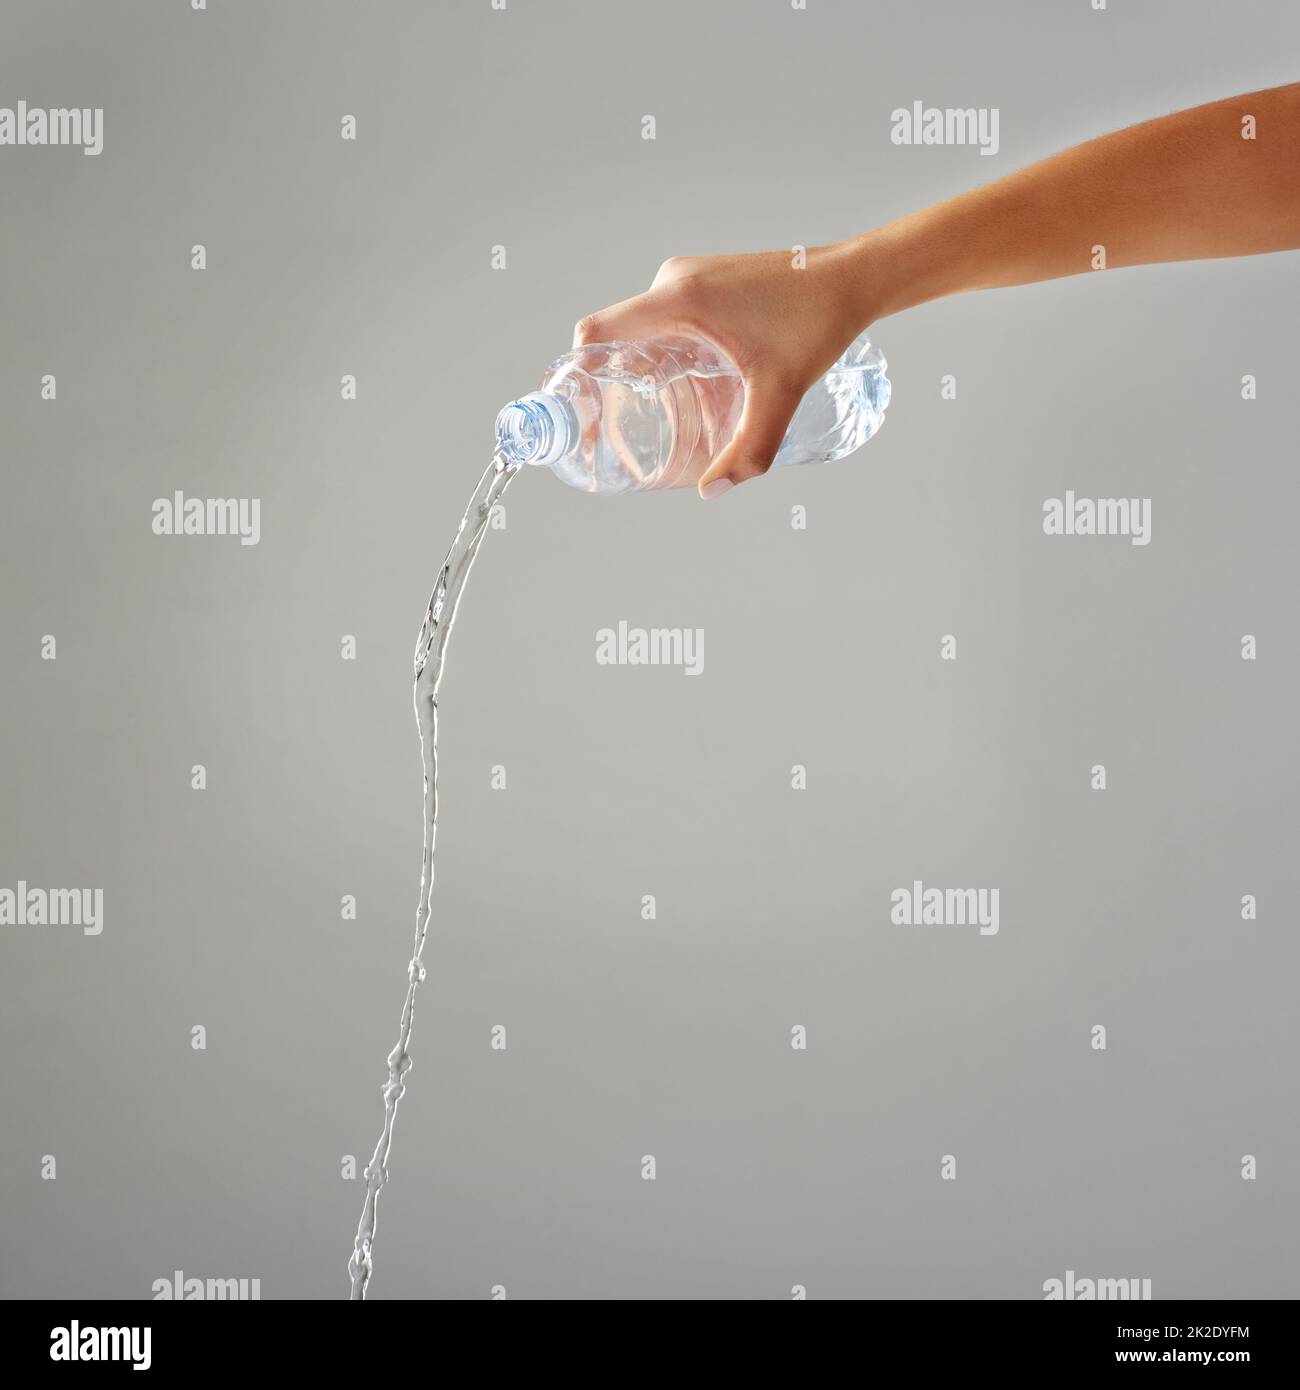 Purified water. Cropped shot of water being poured out of a bottle against a grey background. Stock Photo